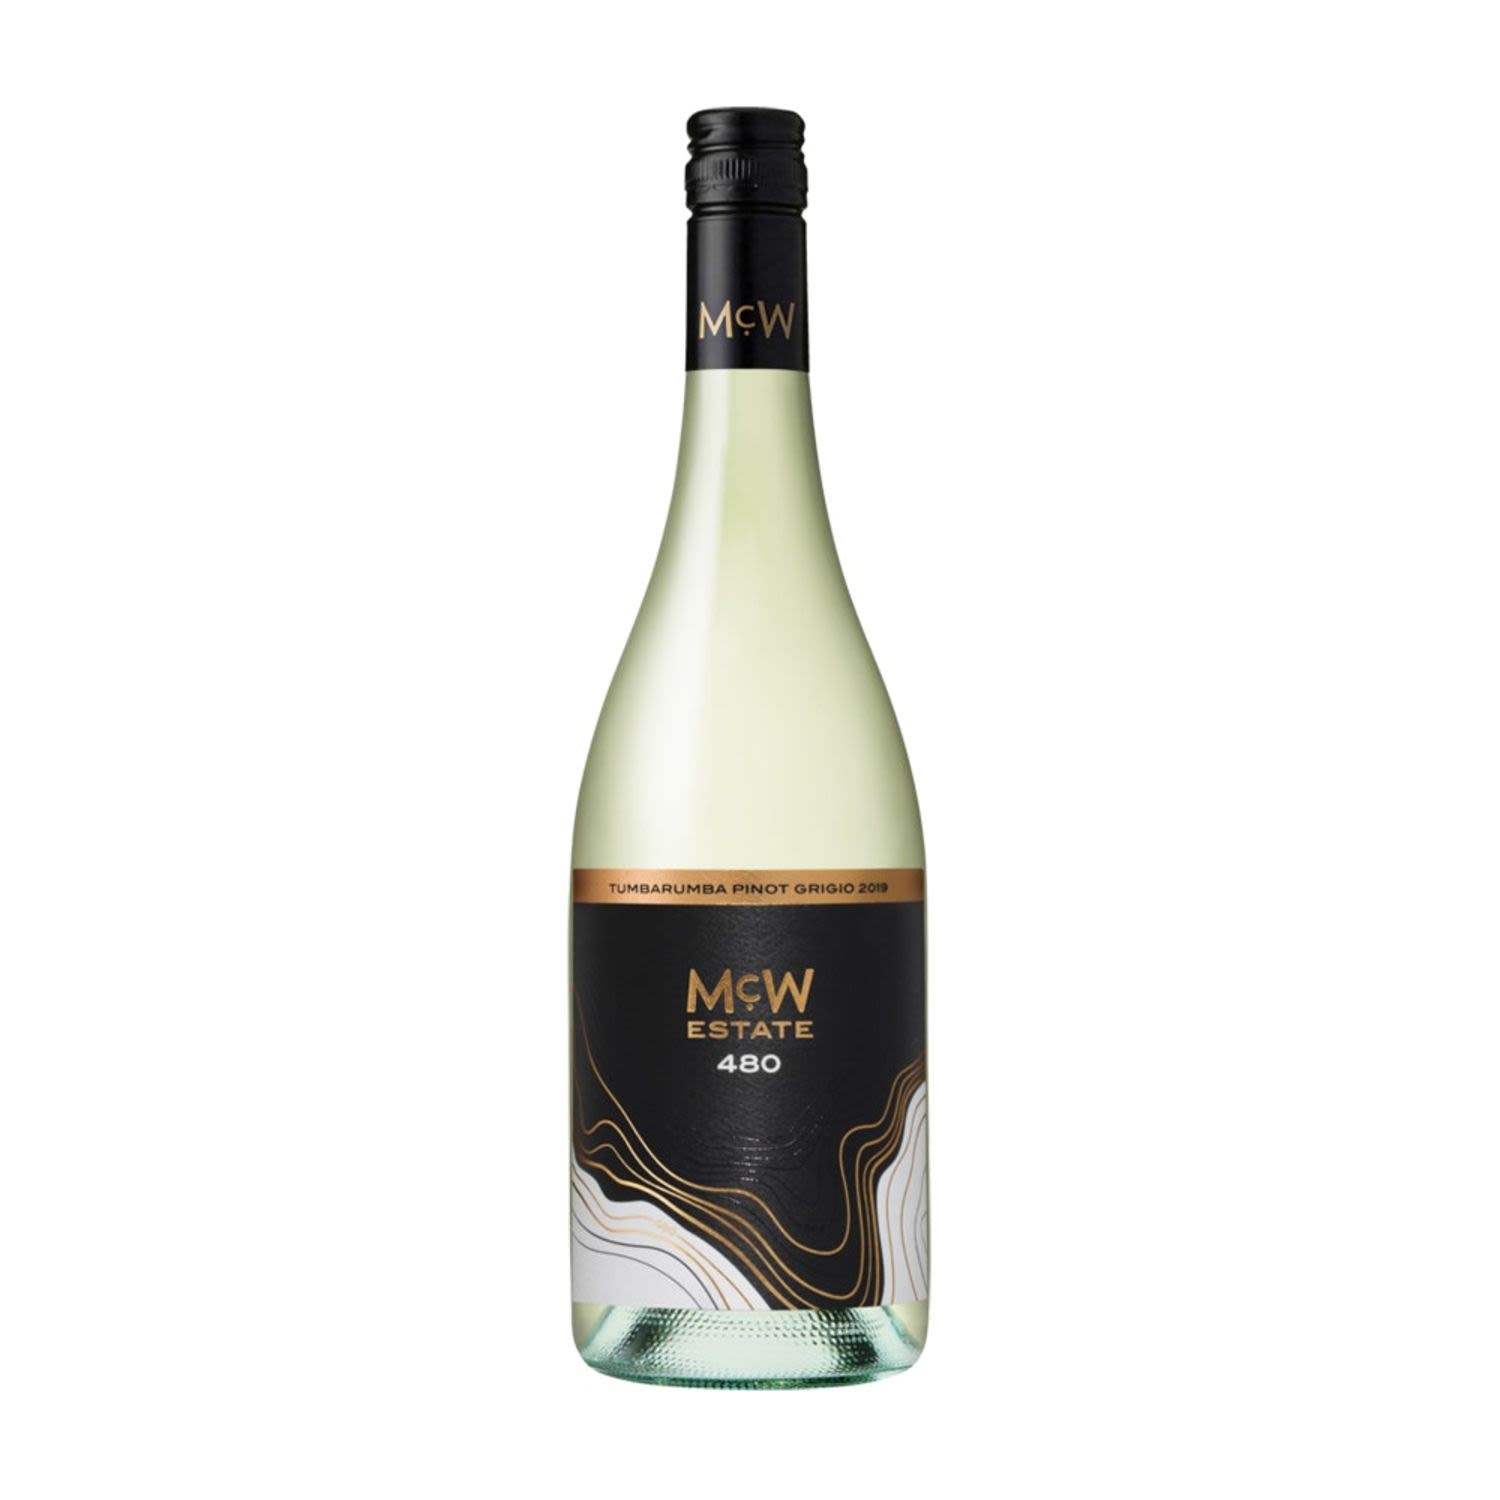 McW 480 Tumbarumba Pinot Grigio 2019 has fragrant with citrus and pear which is a perfect addition to food or can be enjoyed on its own.<br /> <br />Alcohol Volume: 13.00%<br /><br />Pack Format: Bottle<br /><br />Standard Drinks: 7.7</br /><br />Pack Type: Bottle<br /><br />Country of Origin: Australia<br /><br />Region: Tumbarumba<br /><br />Vintage: Vintages Vary<br />